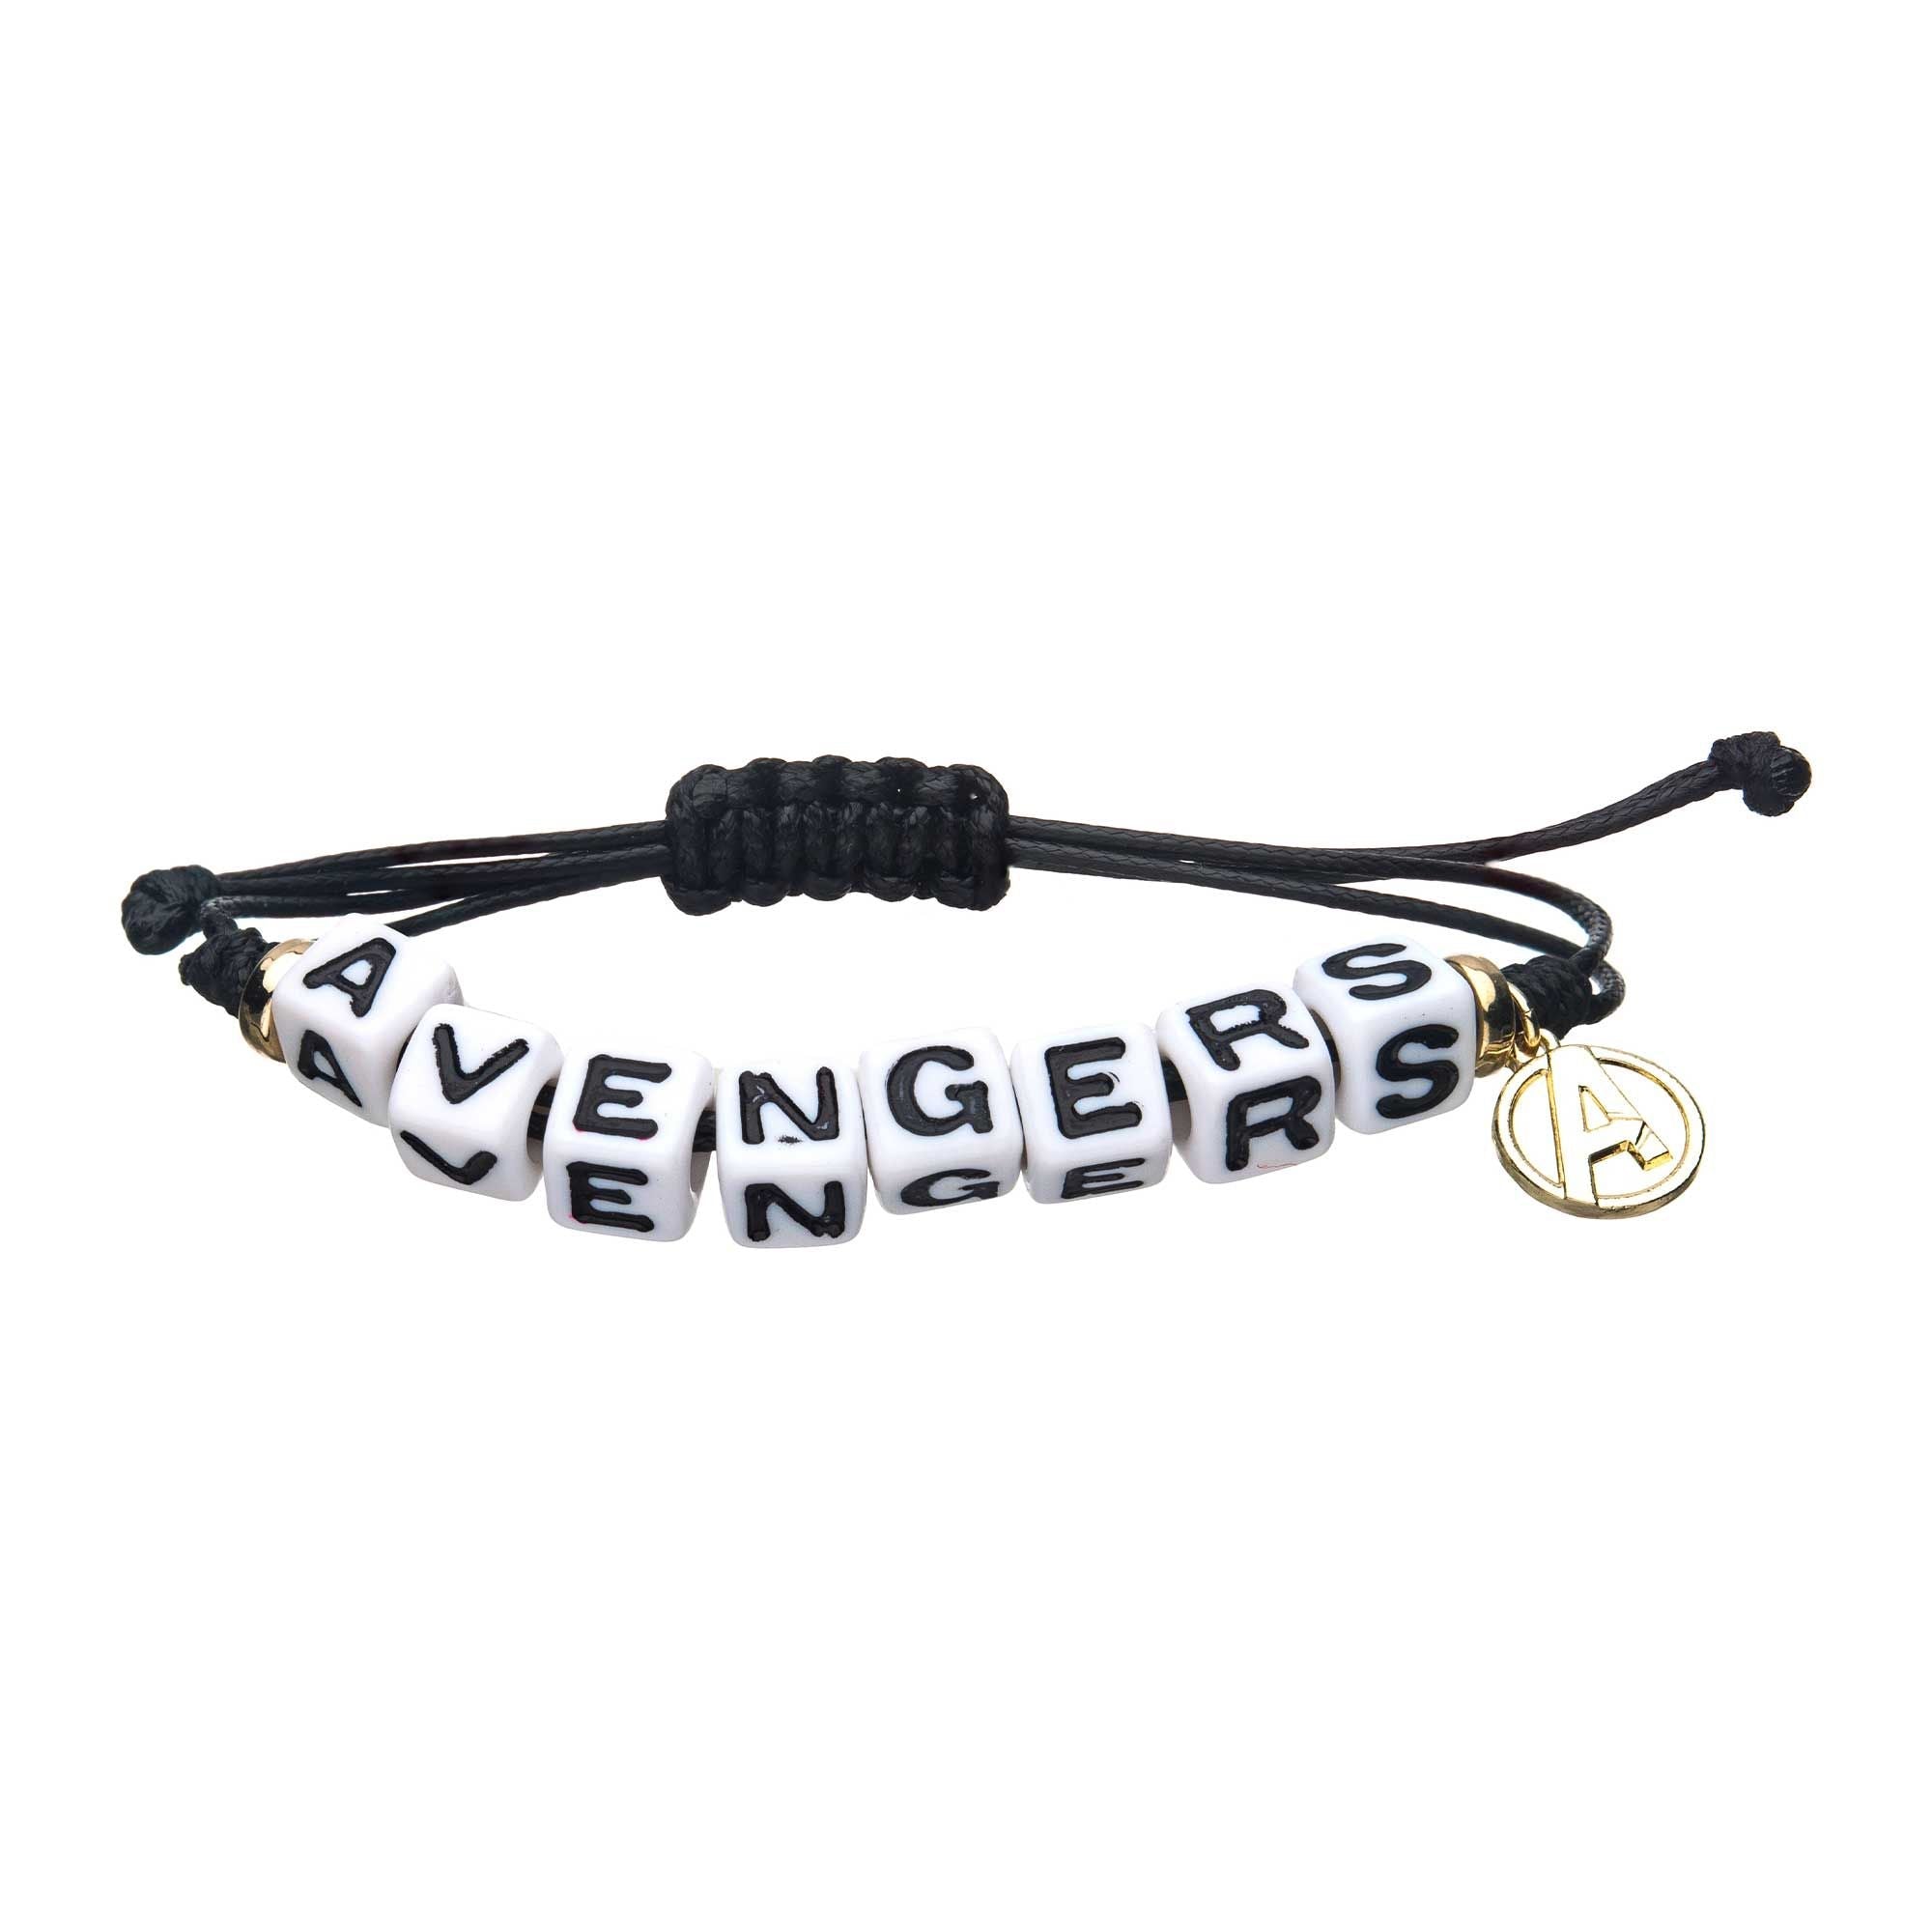 Buy RVM Jewels Avengers Infinity War Endgame Thanos 6 Gauntlet Power Stones  Leather Bracelet for Boys and Men at Amazon.in